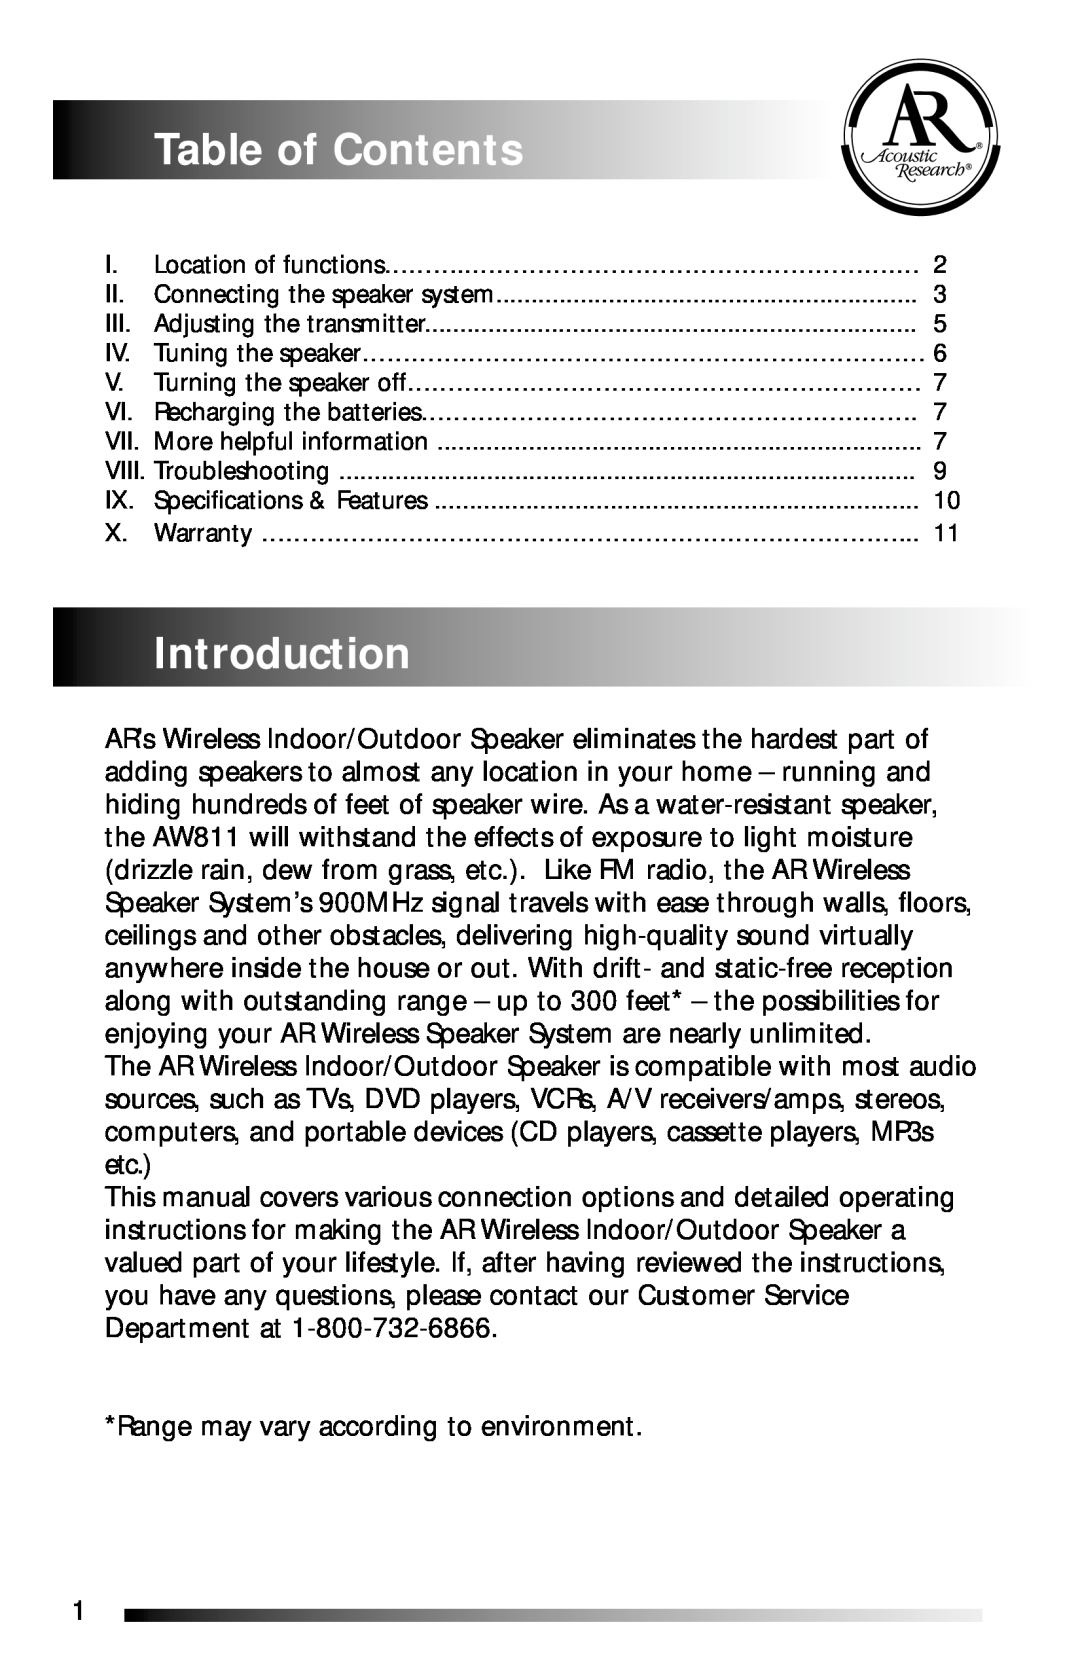 Recoton/Advent AW811 operation manual TableofContents, Introduction 